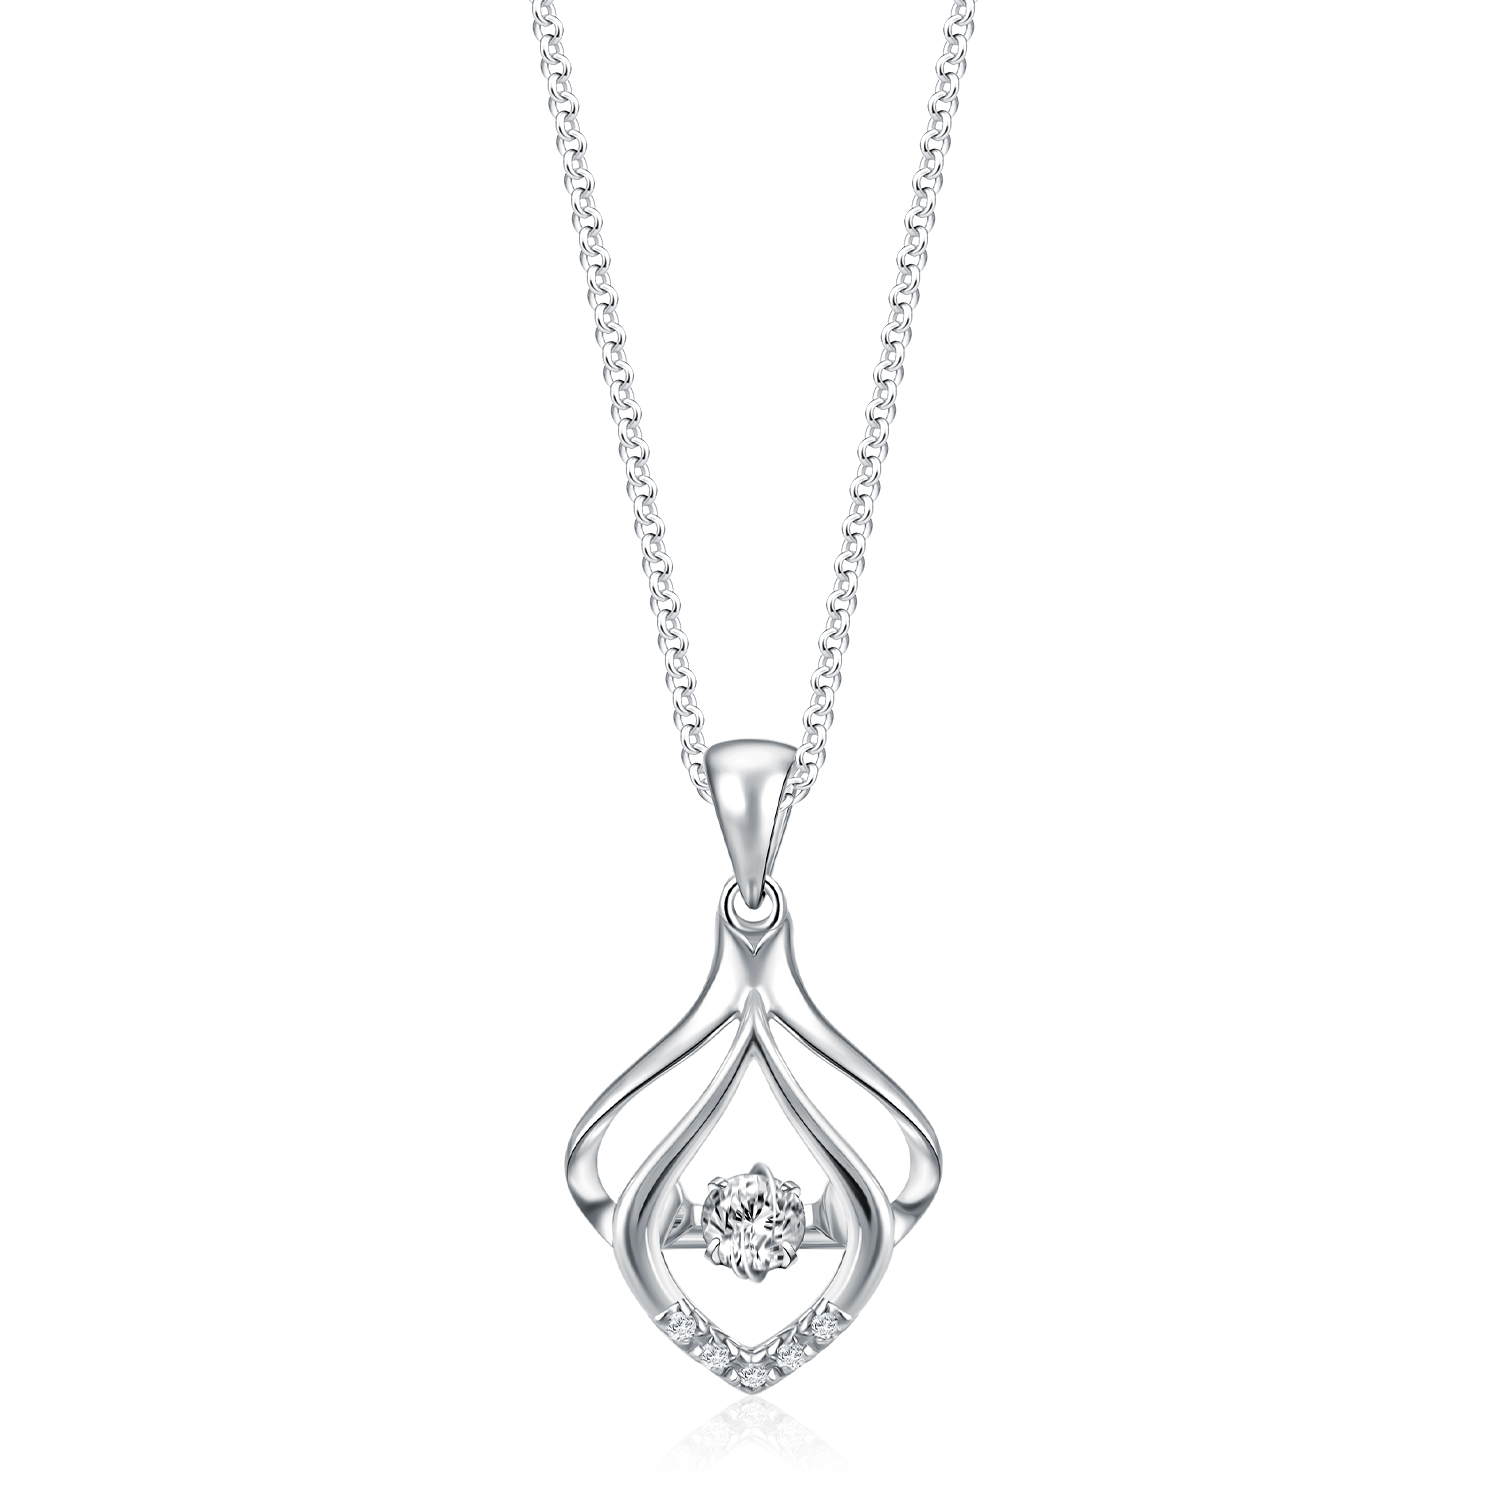 Rence Dancing Star Diamond Pendant with Chain | SK Jewellery